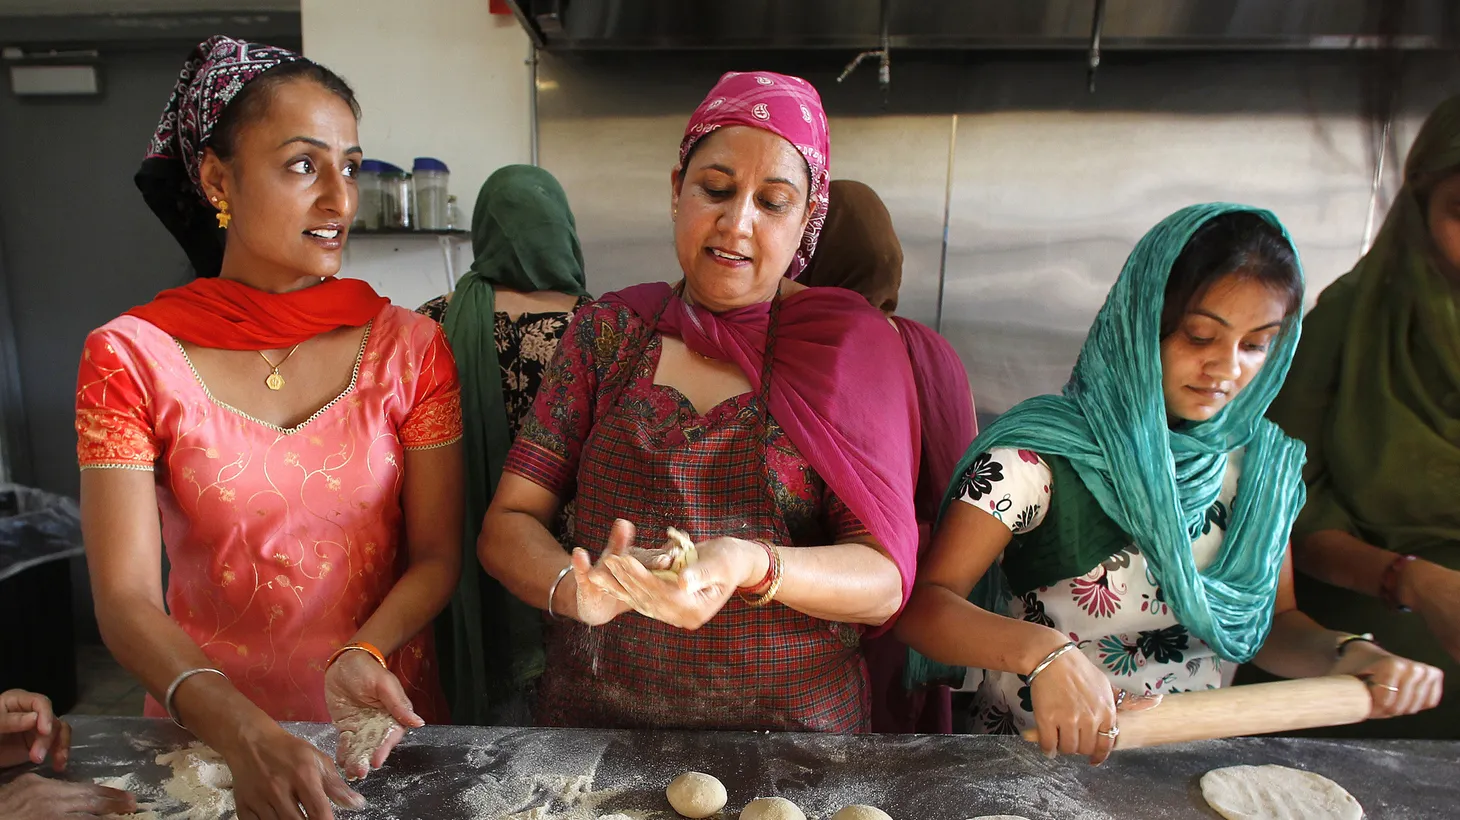 At the gurdwara (Sikh temple) in Oak Creek, Wisconsin, Mandeep Ahuja (left) and Jasbir Dulai (center) make roti (unleavened bread) for the langar, a Sikh traditional community meal.